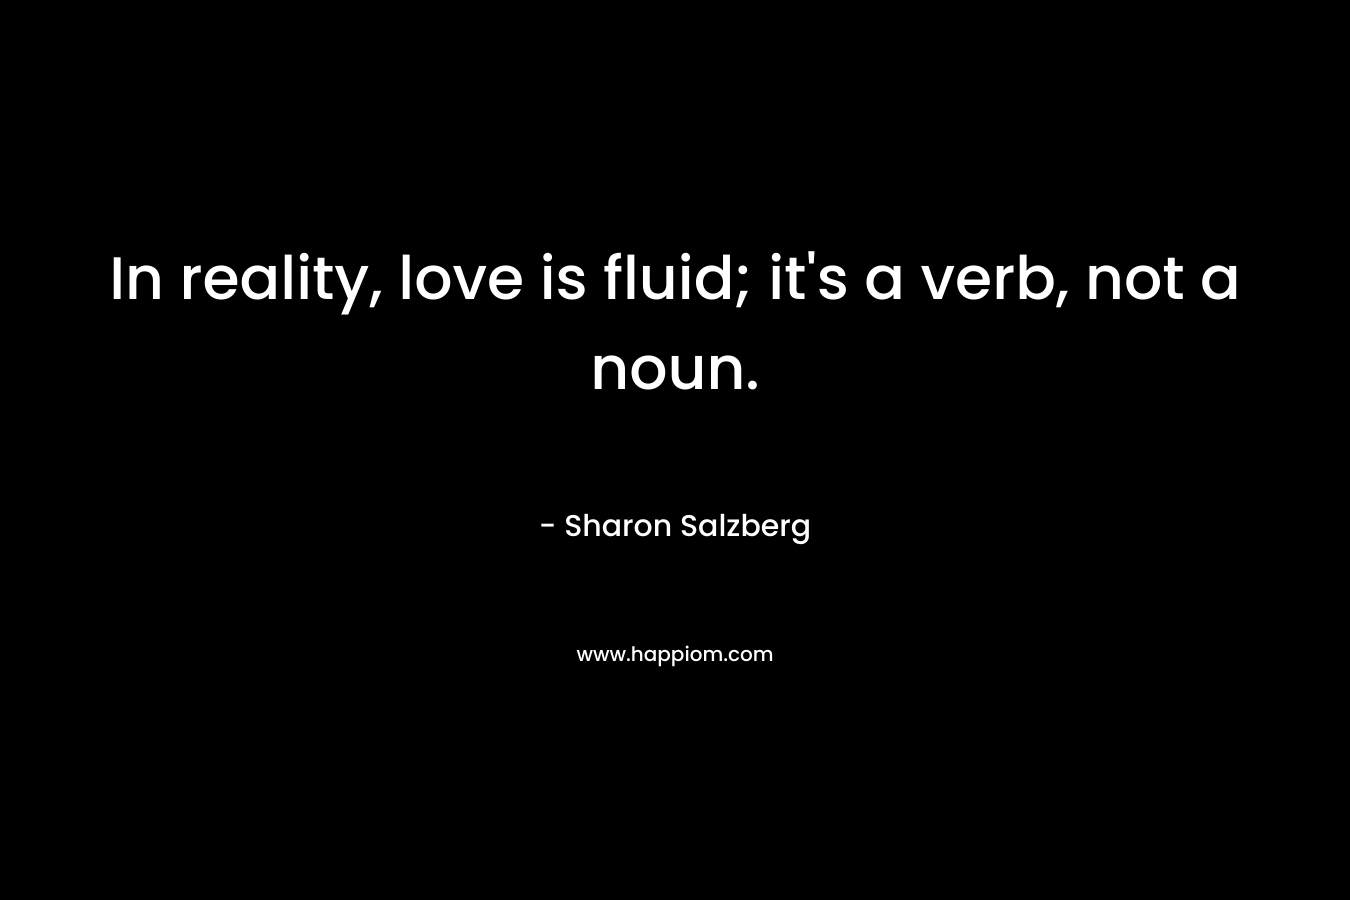 In reality, love is fluid; it's a verb, not a noun.